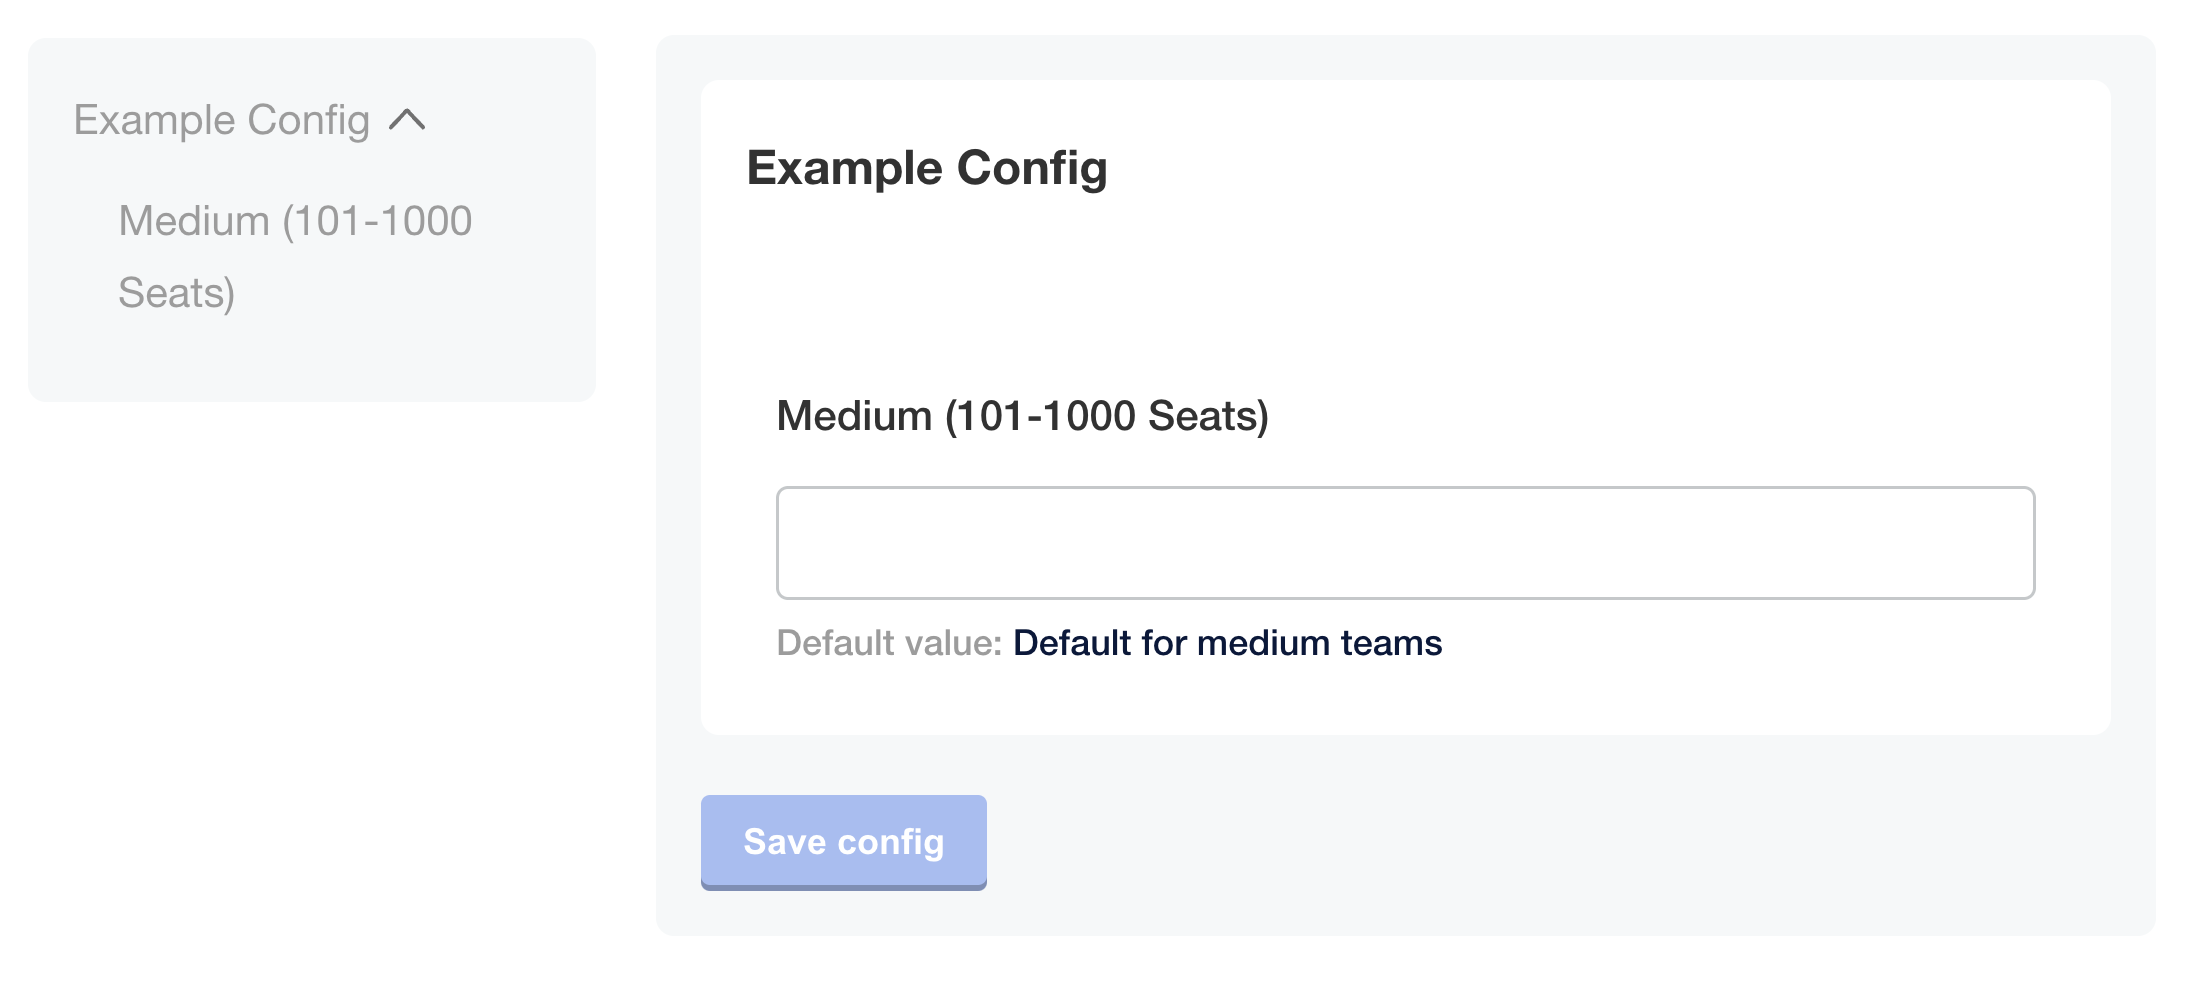 Config page displaying the Medium (101-1000 Seats) item